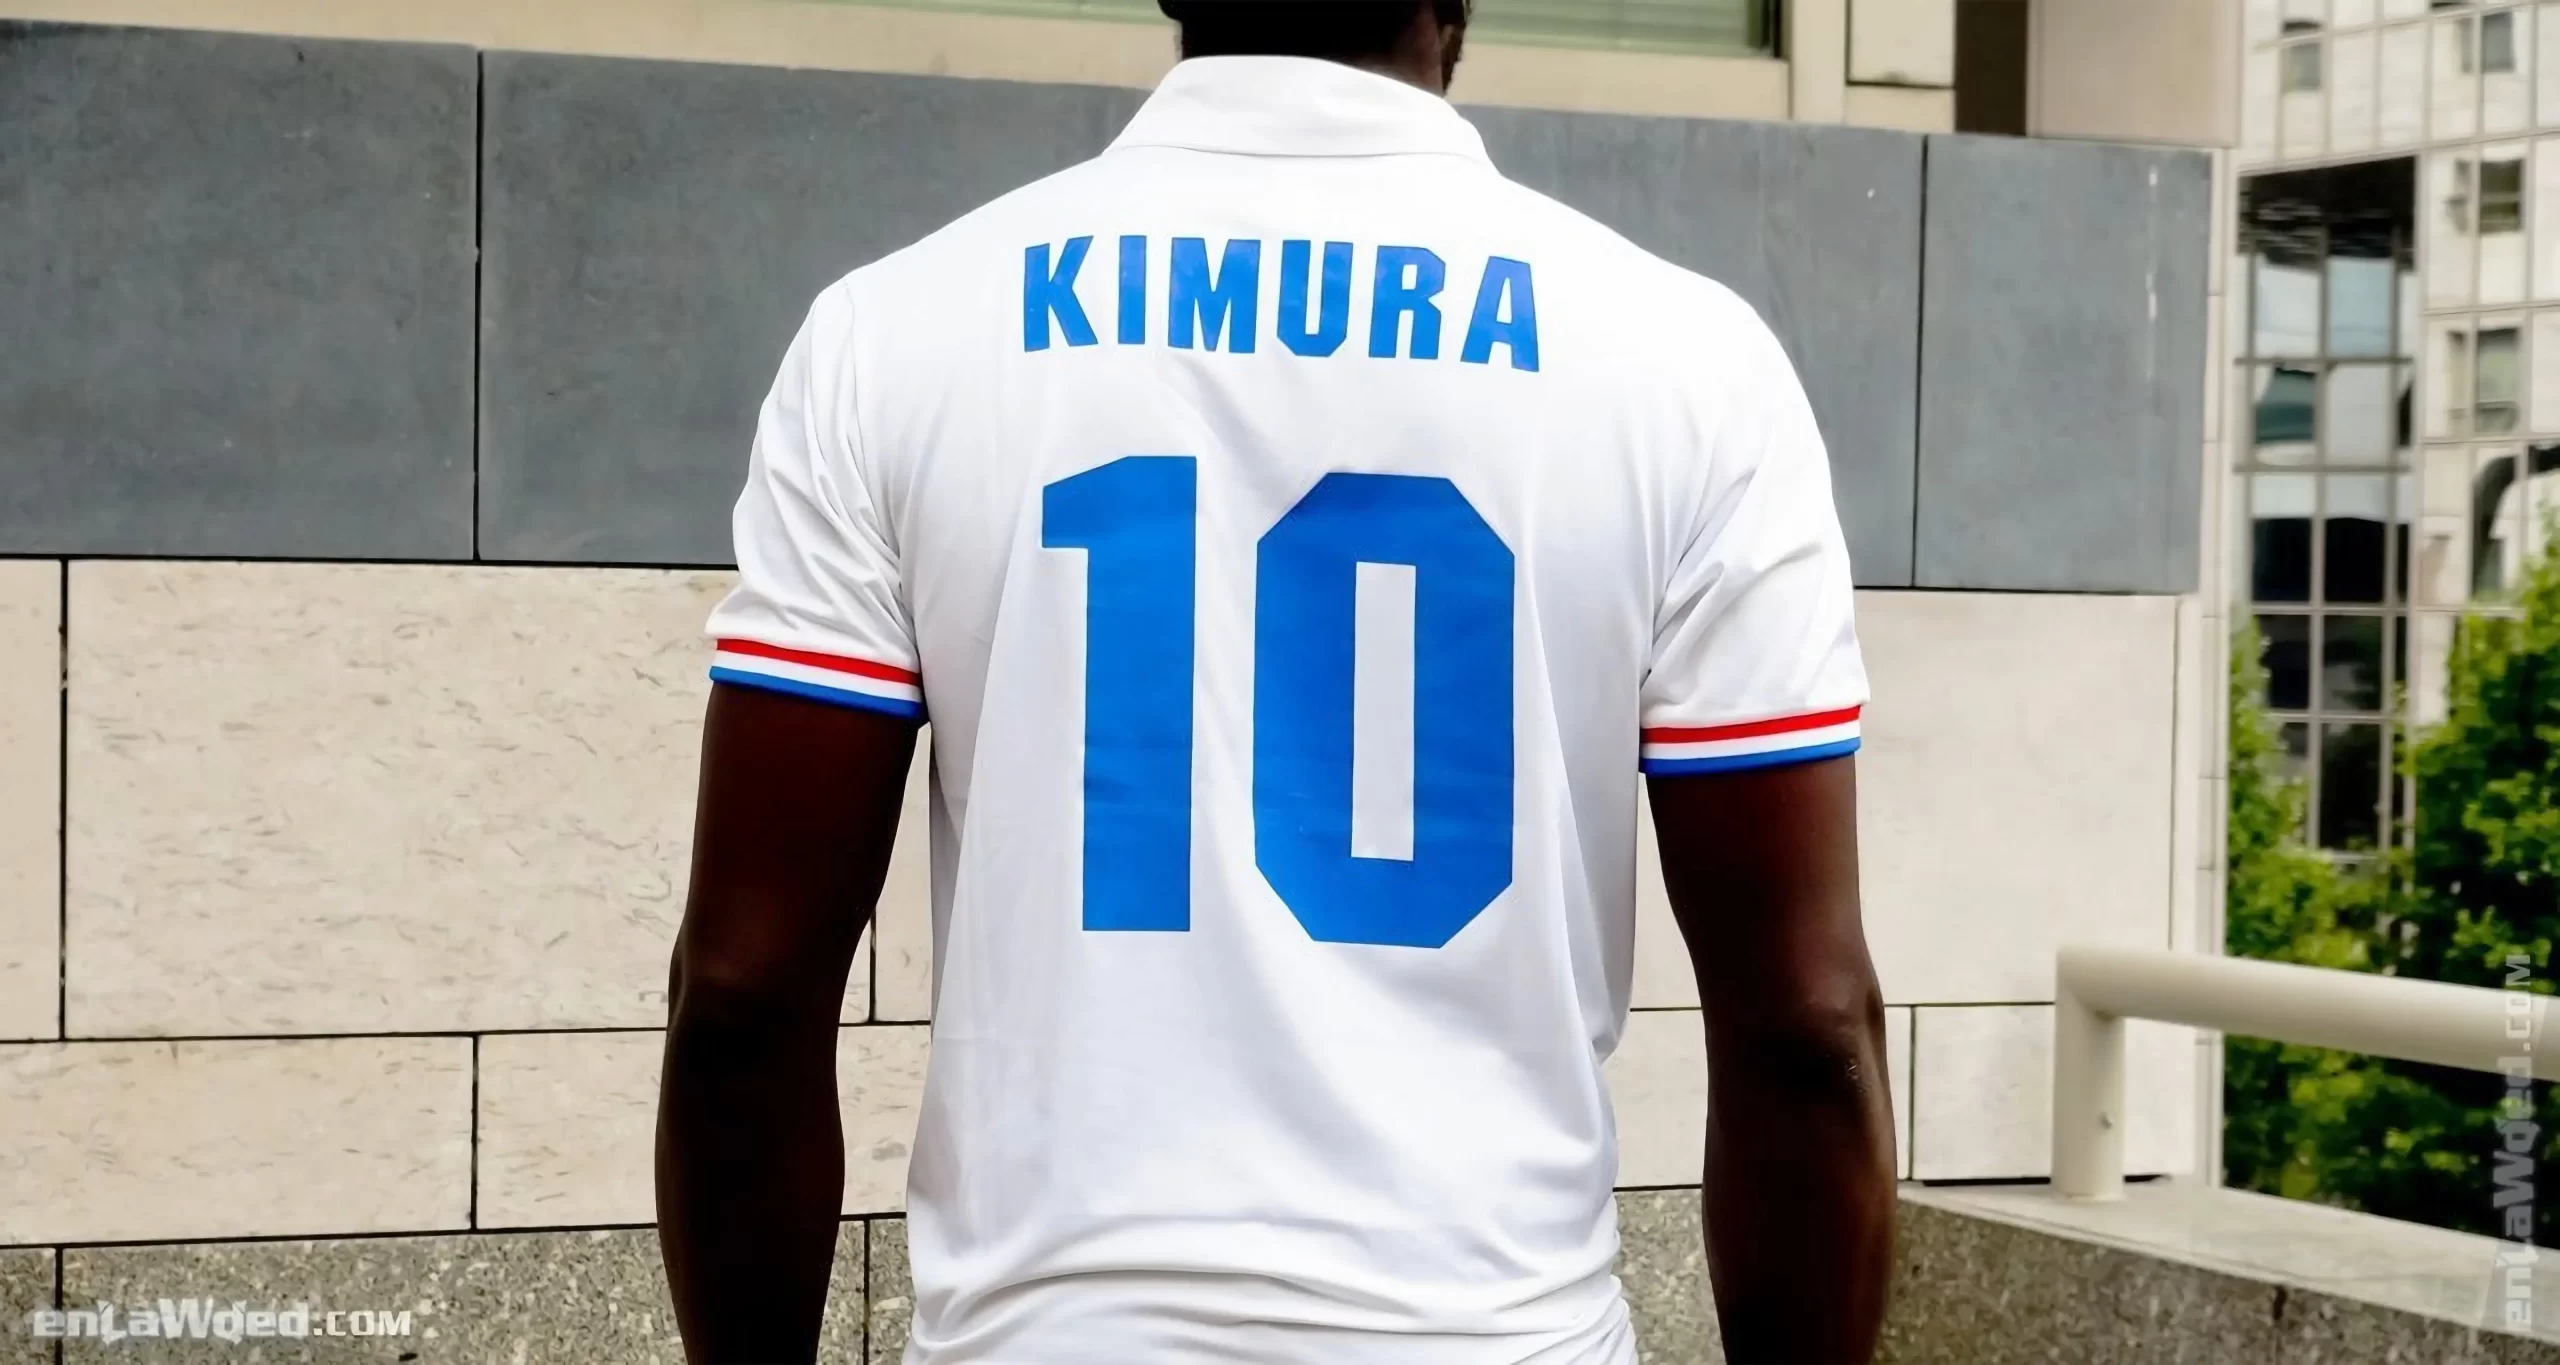 Men’s 2006 Japan ’85 Kimura Jersey by Adidas: Discover (EnLawded.com file #lmc4v4yqz8ymyfs2c78)